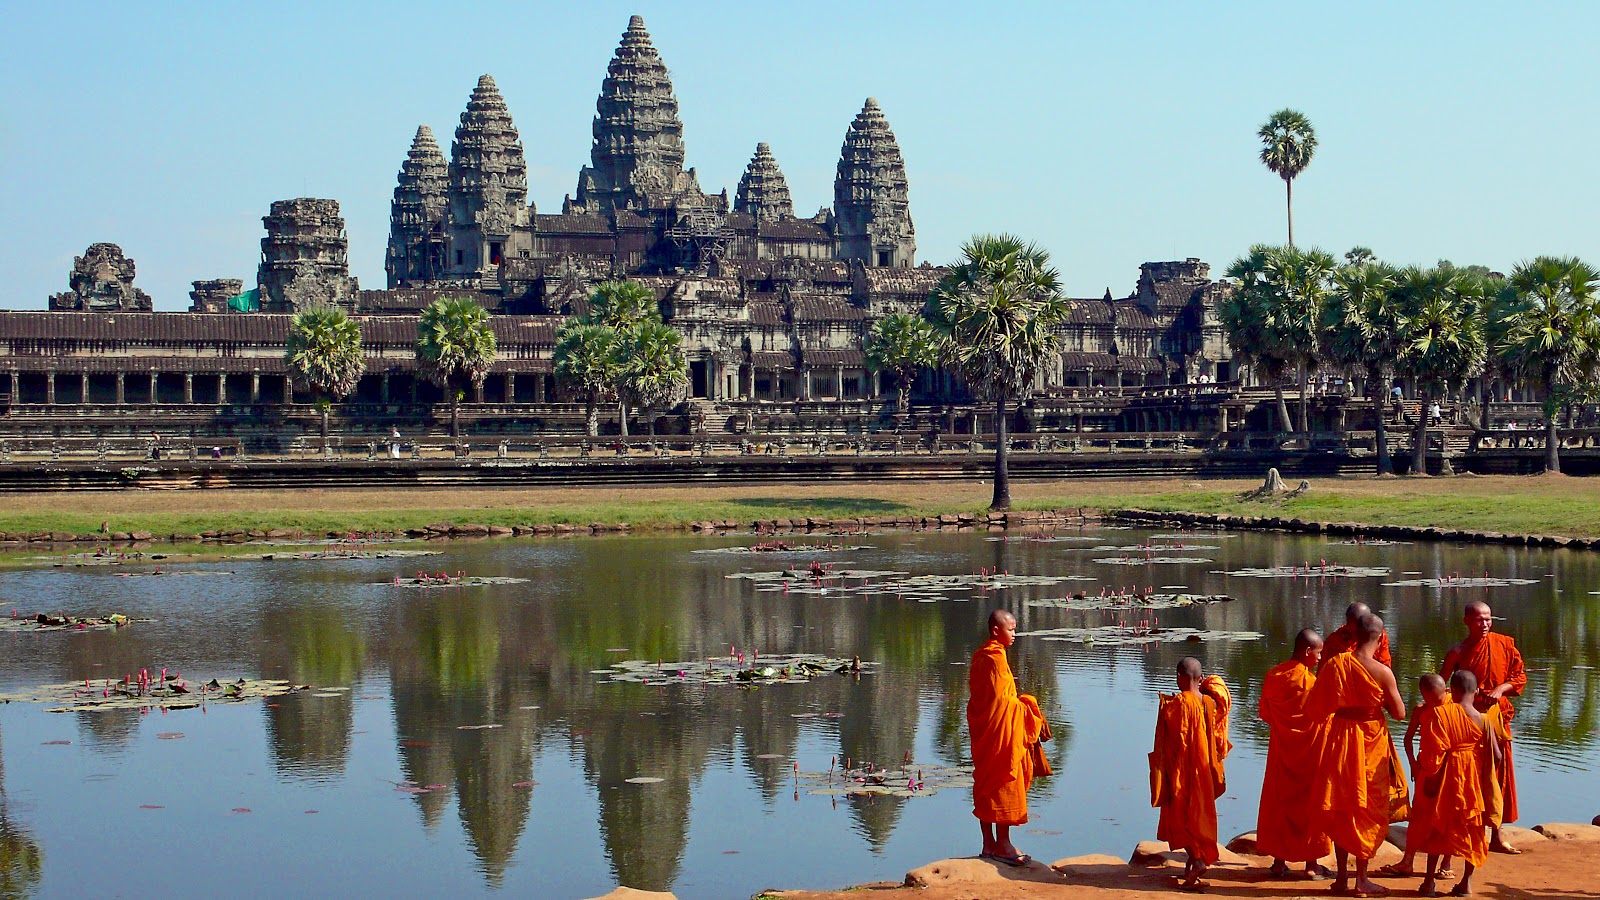 https://upload.wikimedia.org/wikipedia/commons/f/f5/Buddhist_monks_in_front_of_the_Angkor_Wat.jpg